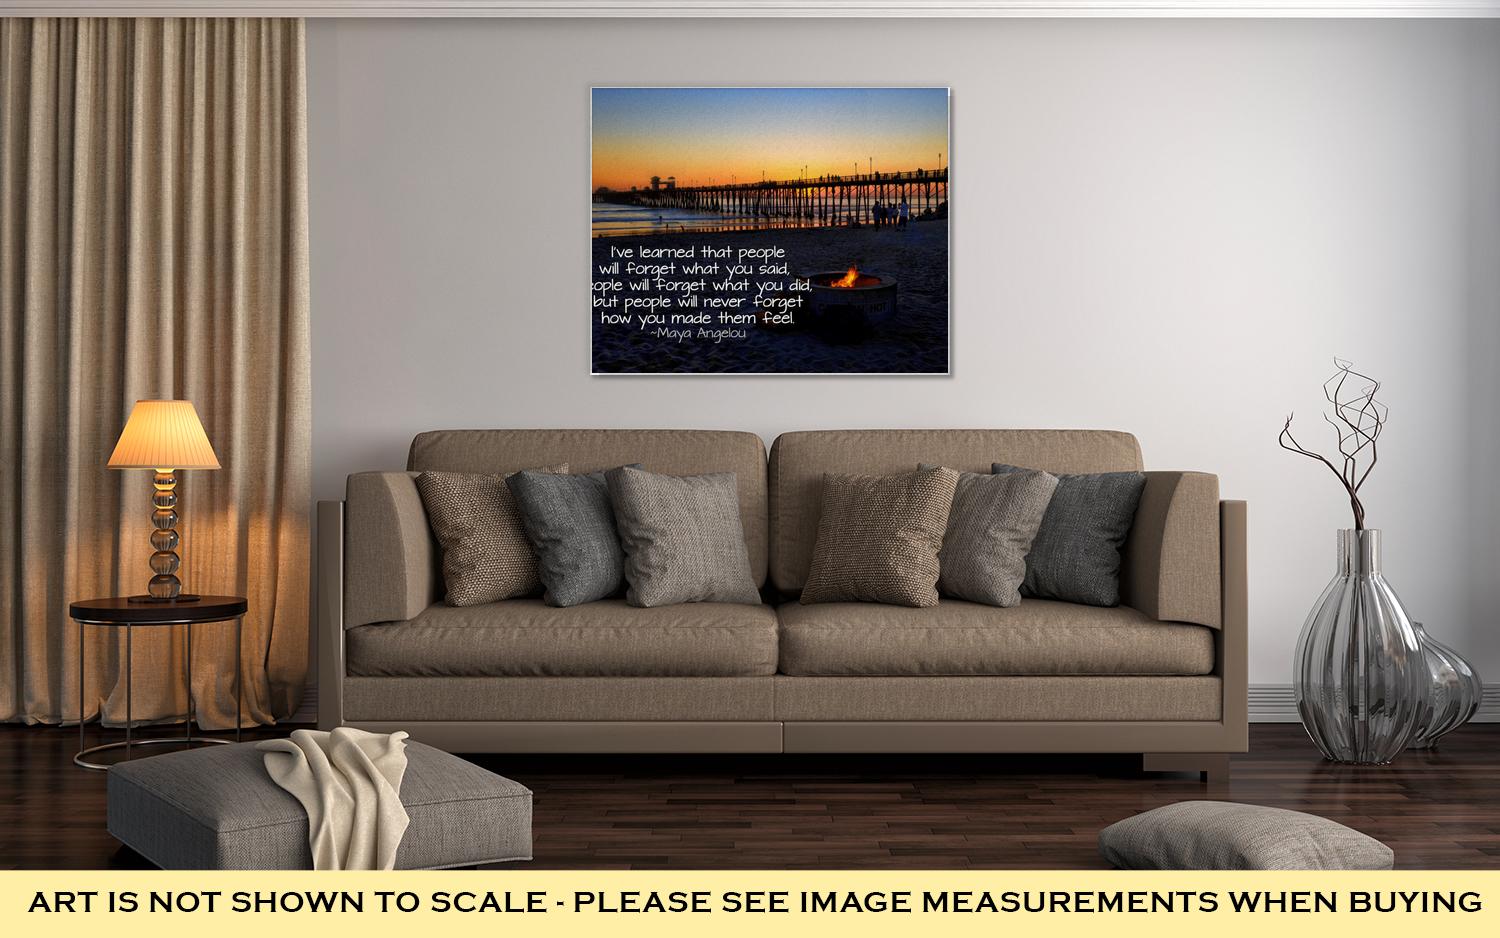 Gallery Wrapped Canvas, Oceanside Pier California With Quote